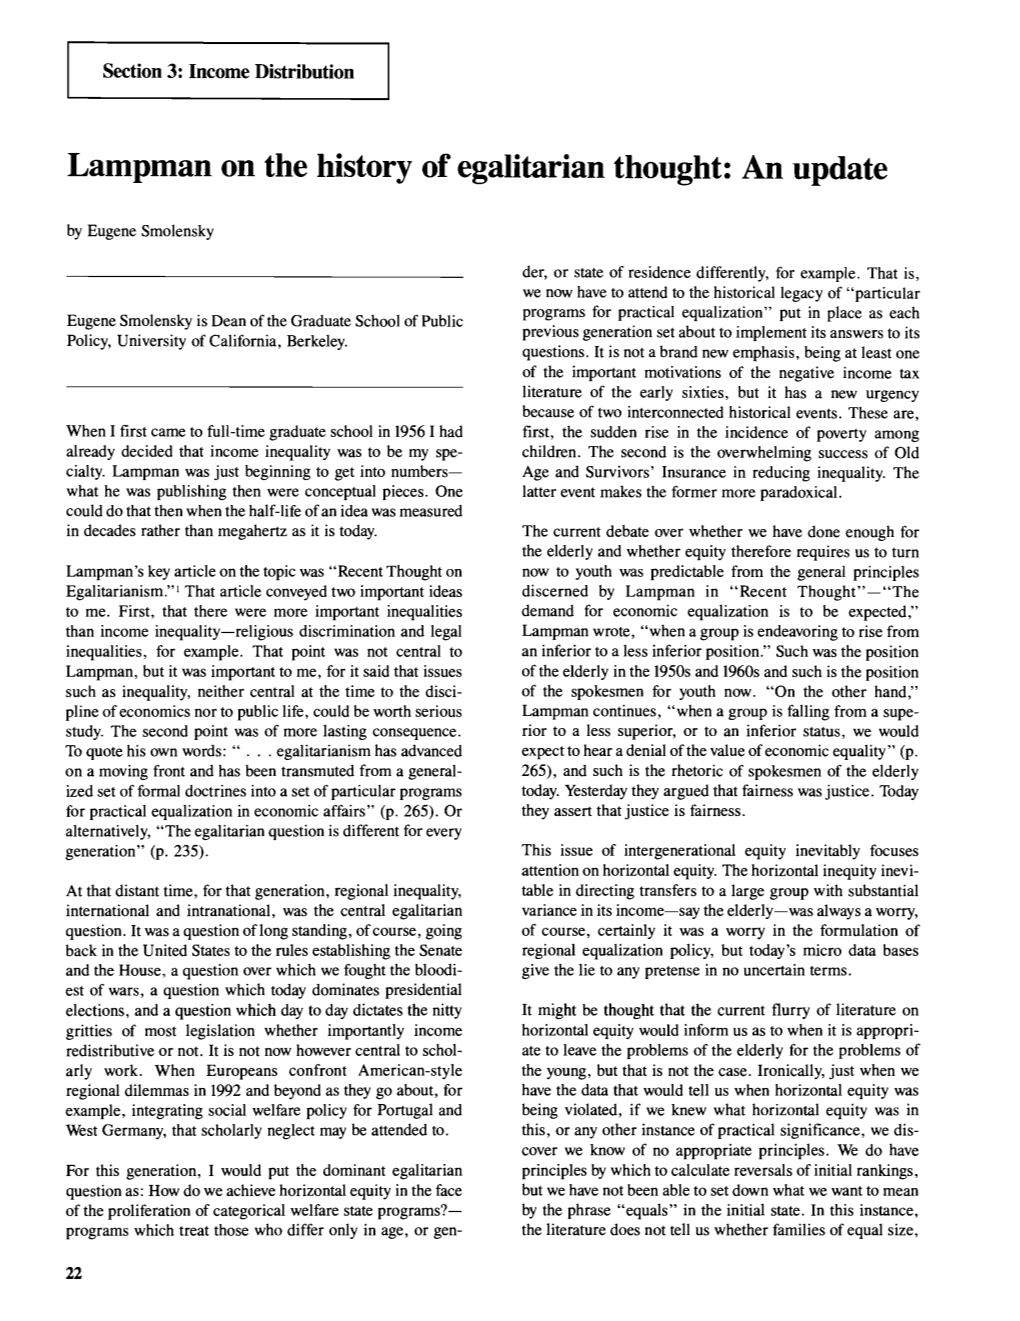 Lampman on the History of Egalitarian Thought: an Update by Eugene Smolensky